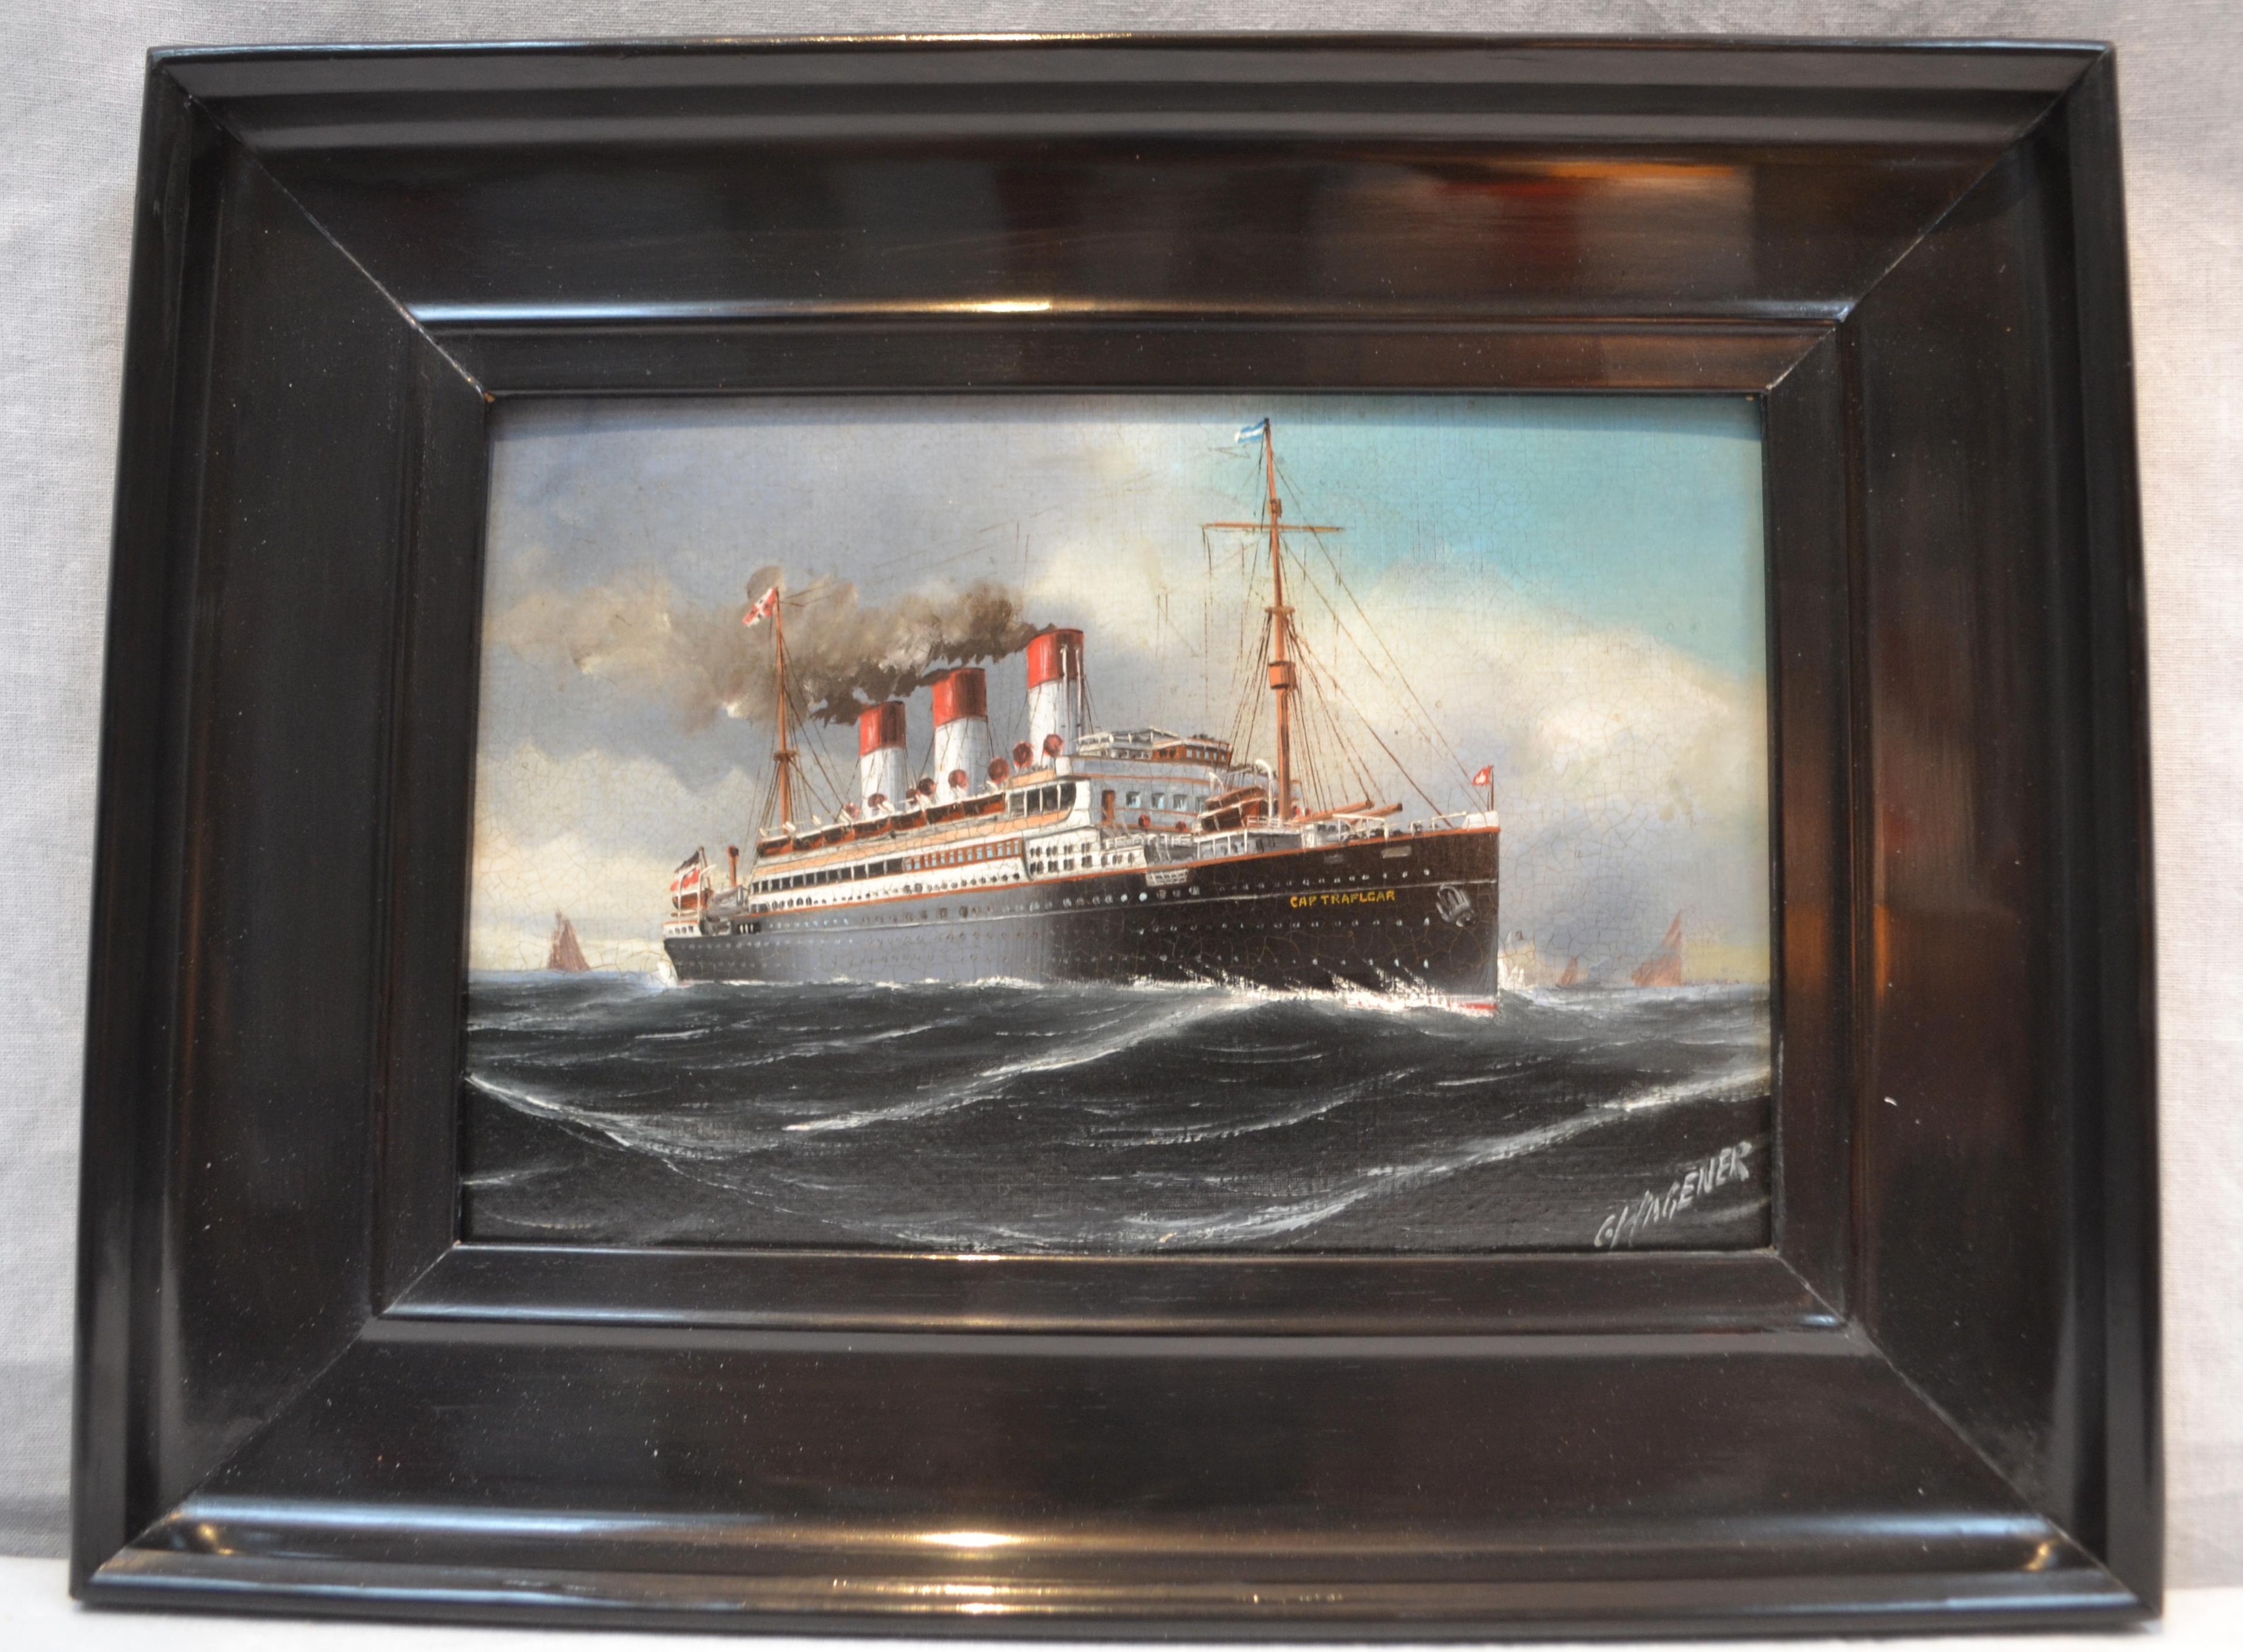 A small oil painting on board signed Wagener of the steam ship cap Trafalgar which was sunk off Trinidad and Tobago in the Caribbean on the 14 September 1914. At the outbreak of World War I, the cap Trafalgar was interned in Buenos Aires. Argentina